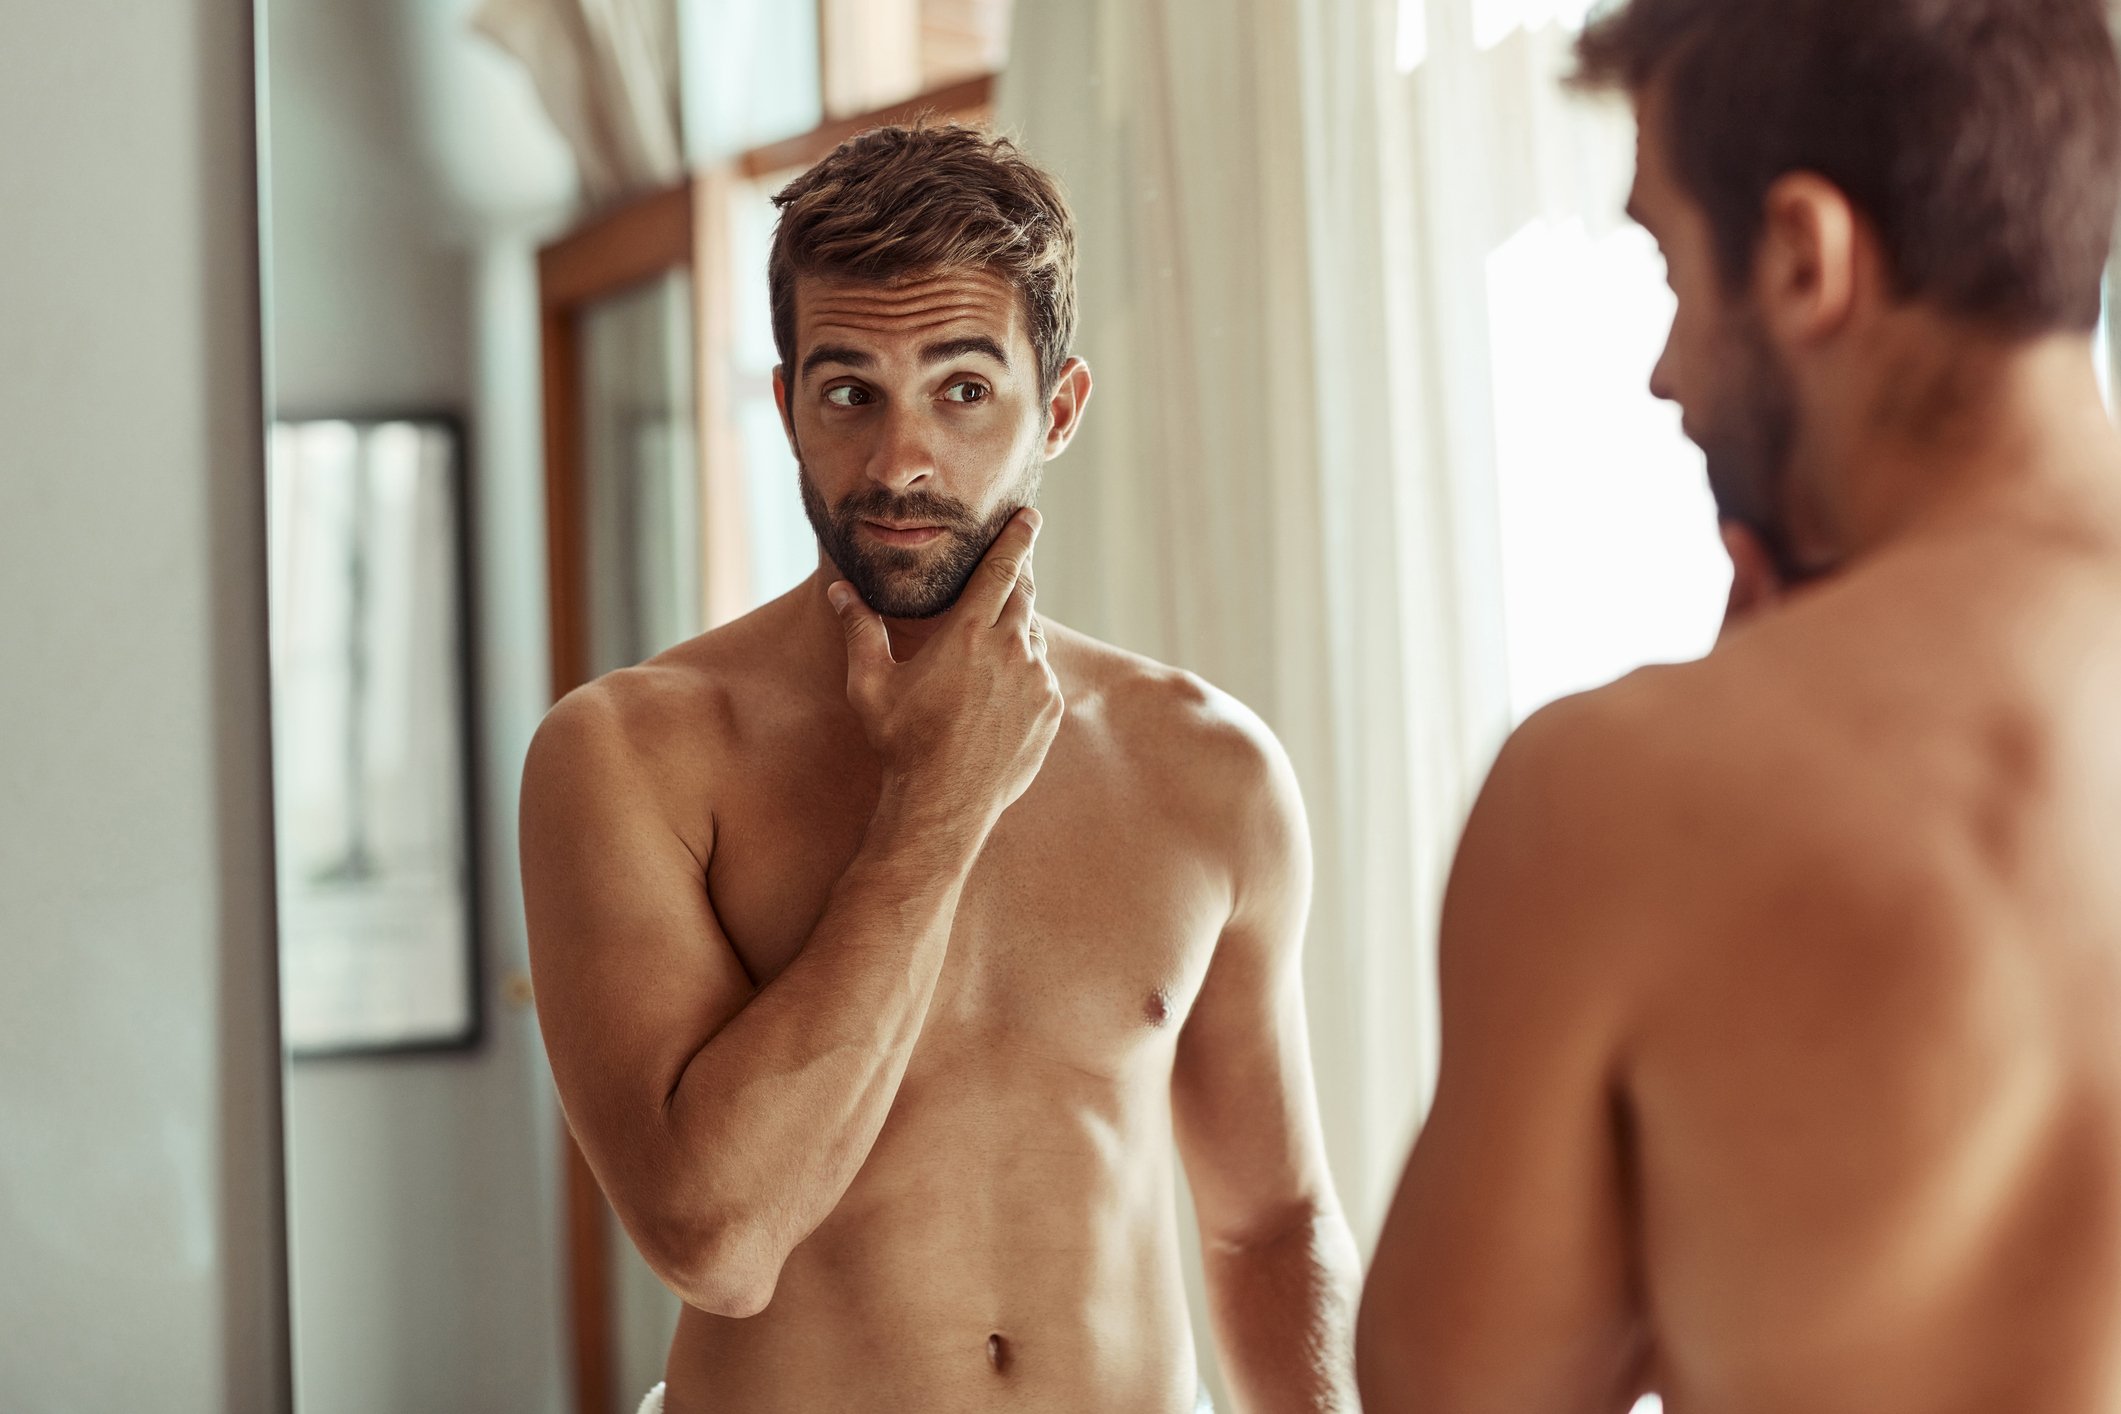 Things you should do when male intimate grooming | Gillette UK